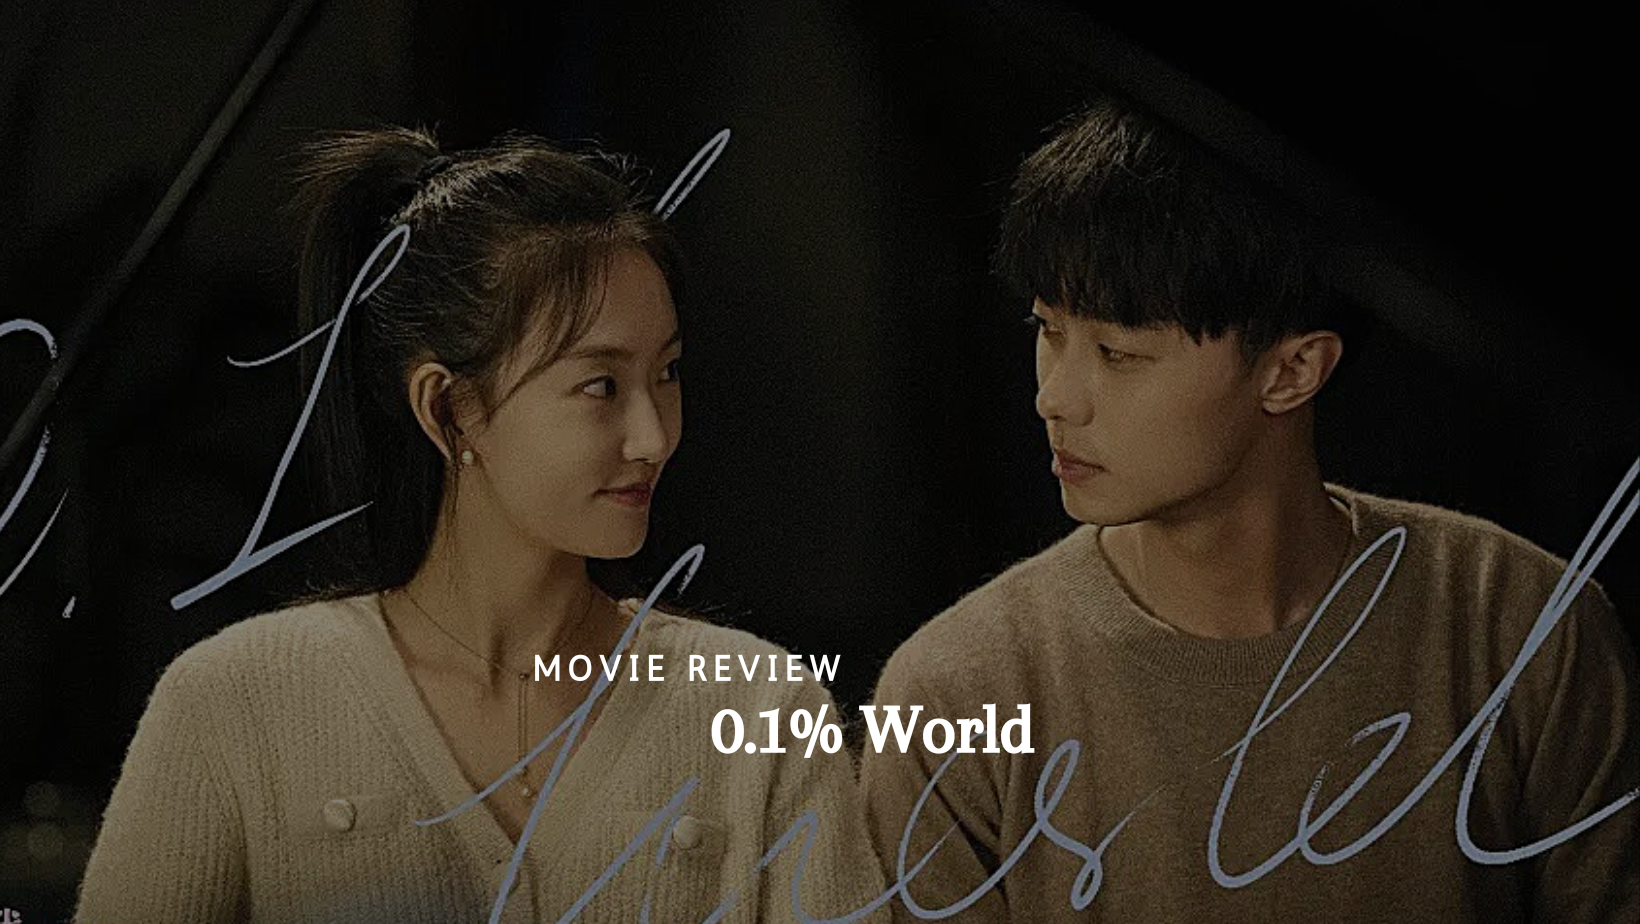 Movie Review: 0.1% World